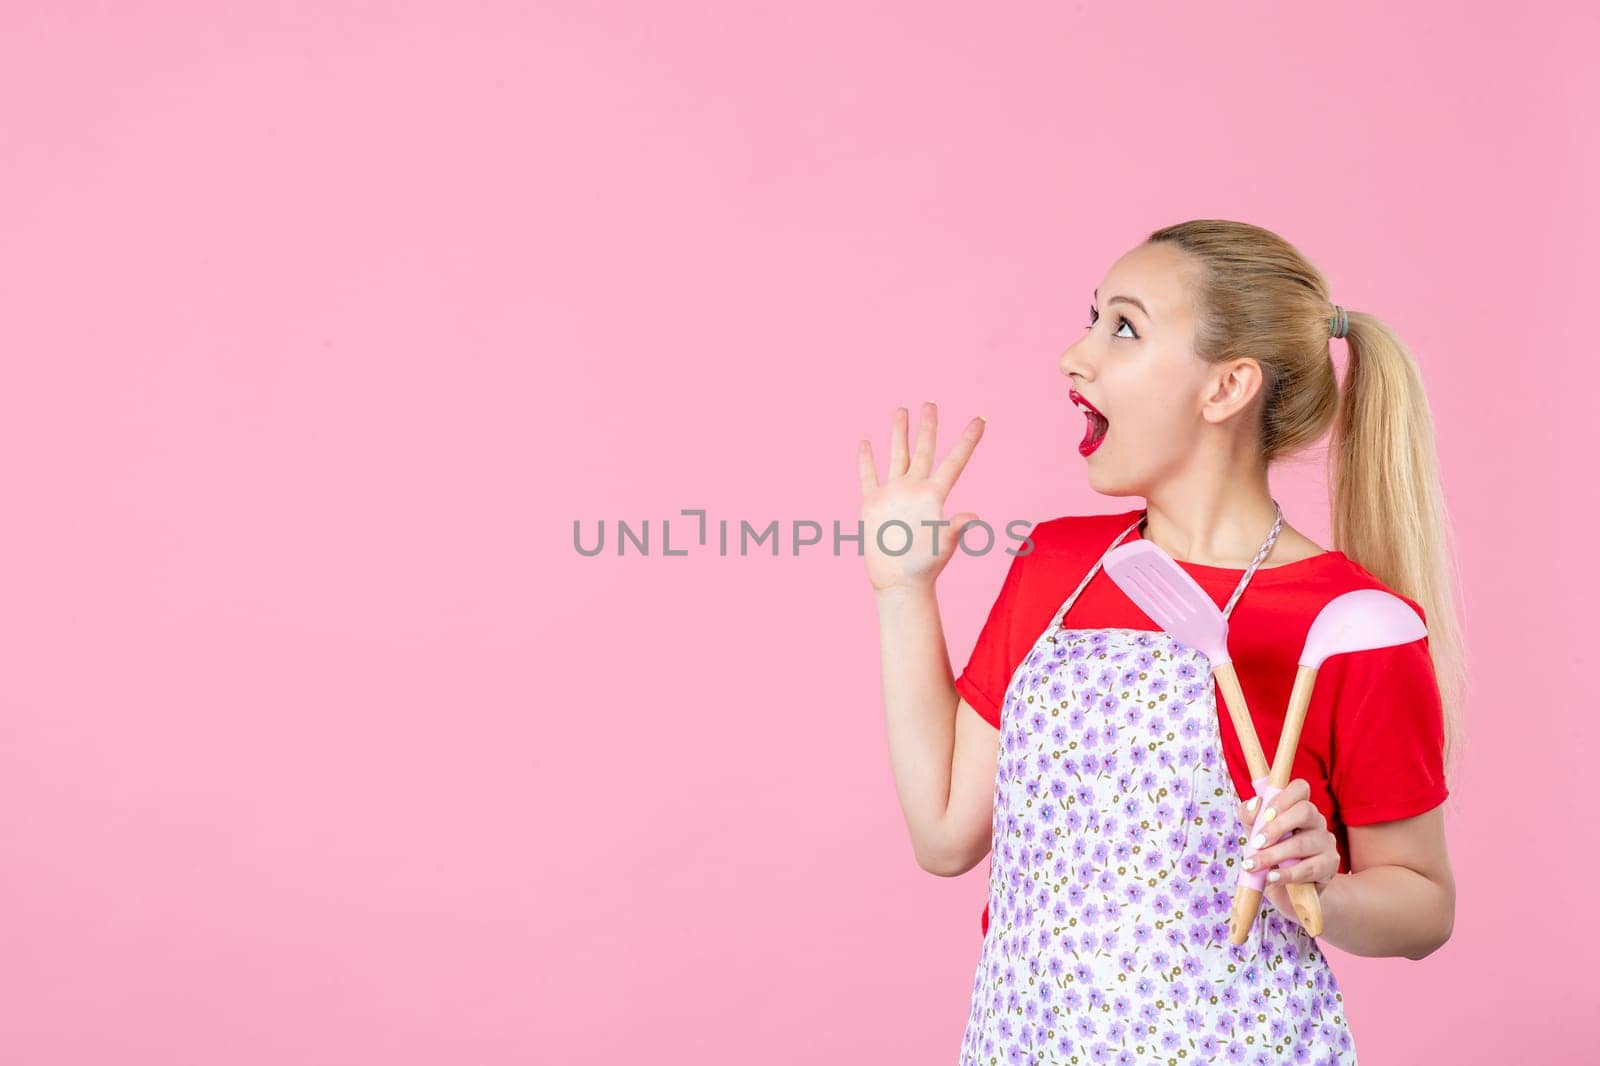 front view young housewife in cape holding spoons on pink background horizontal profession duty job worker wife uniform occupation by Kamran